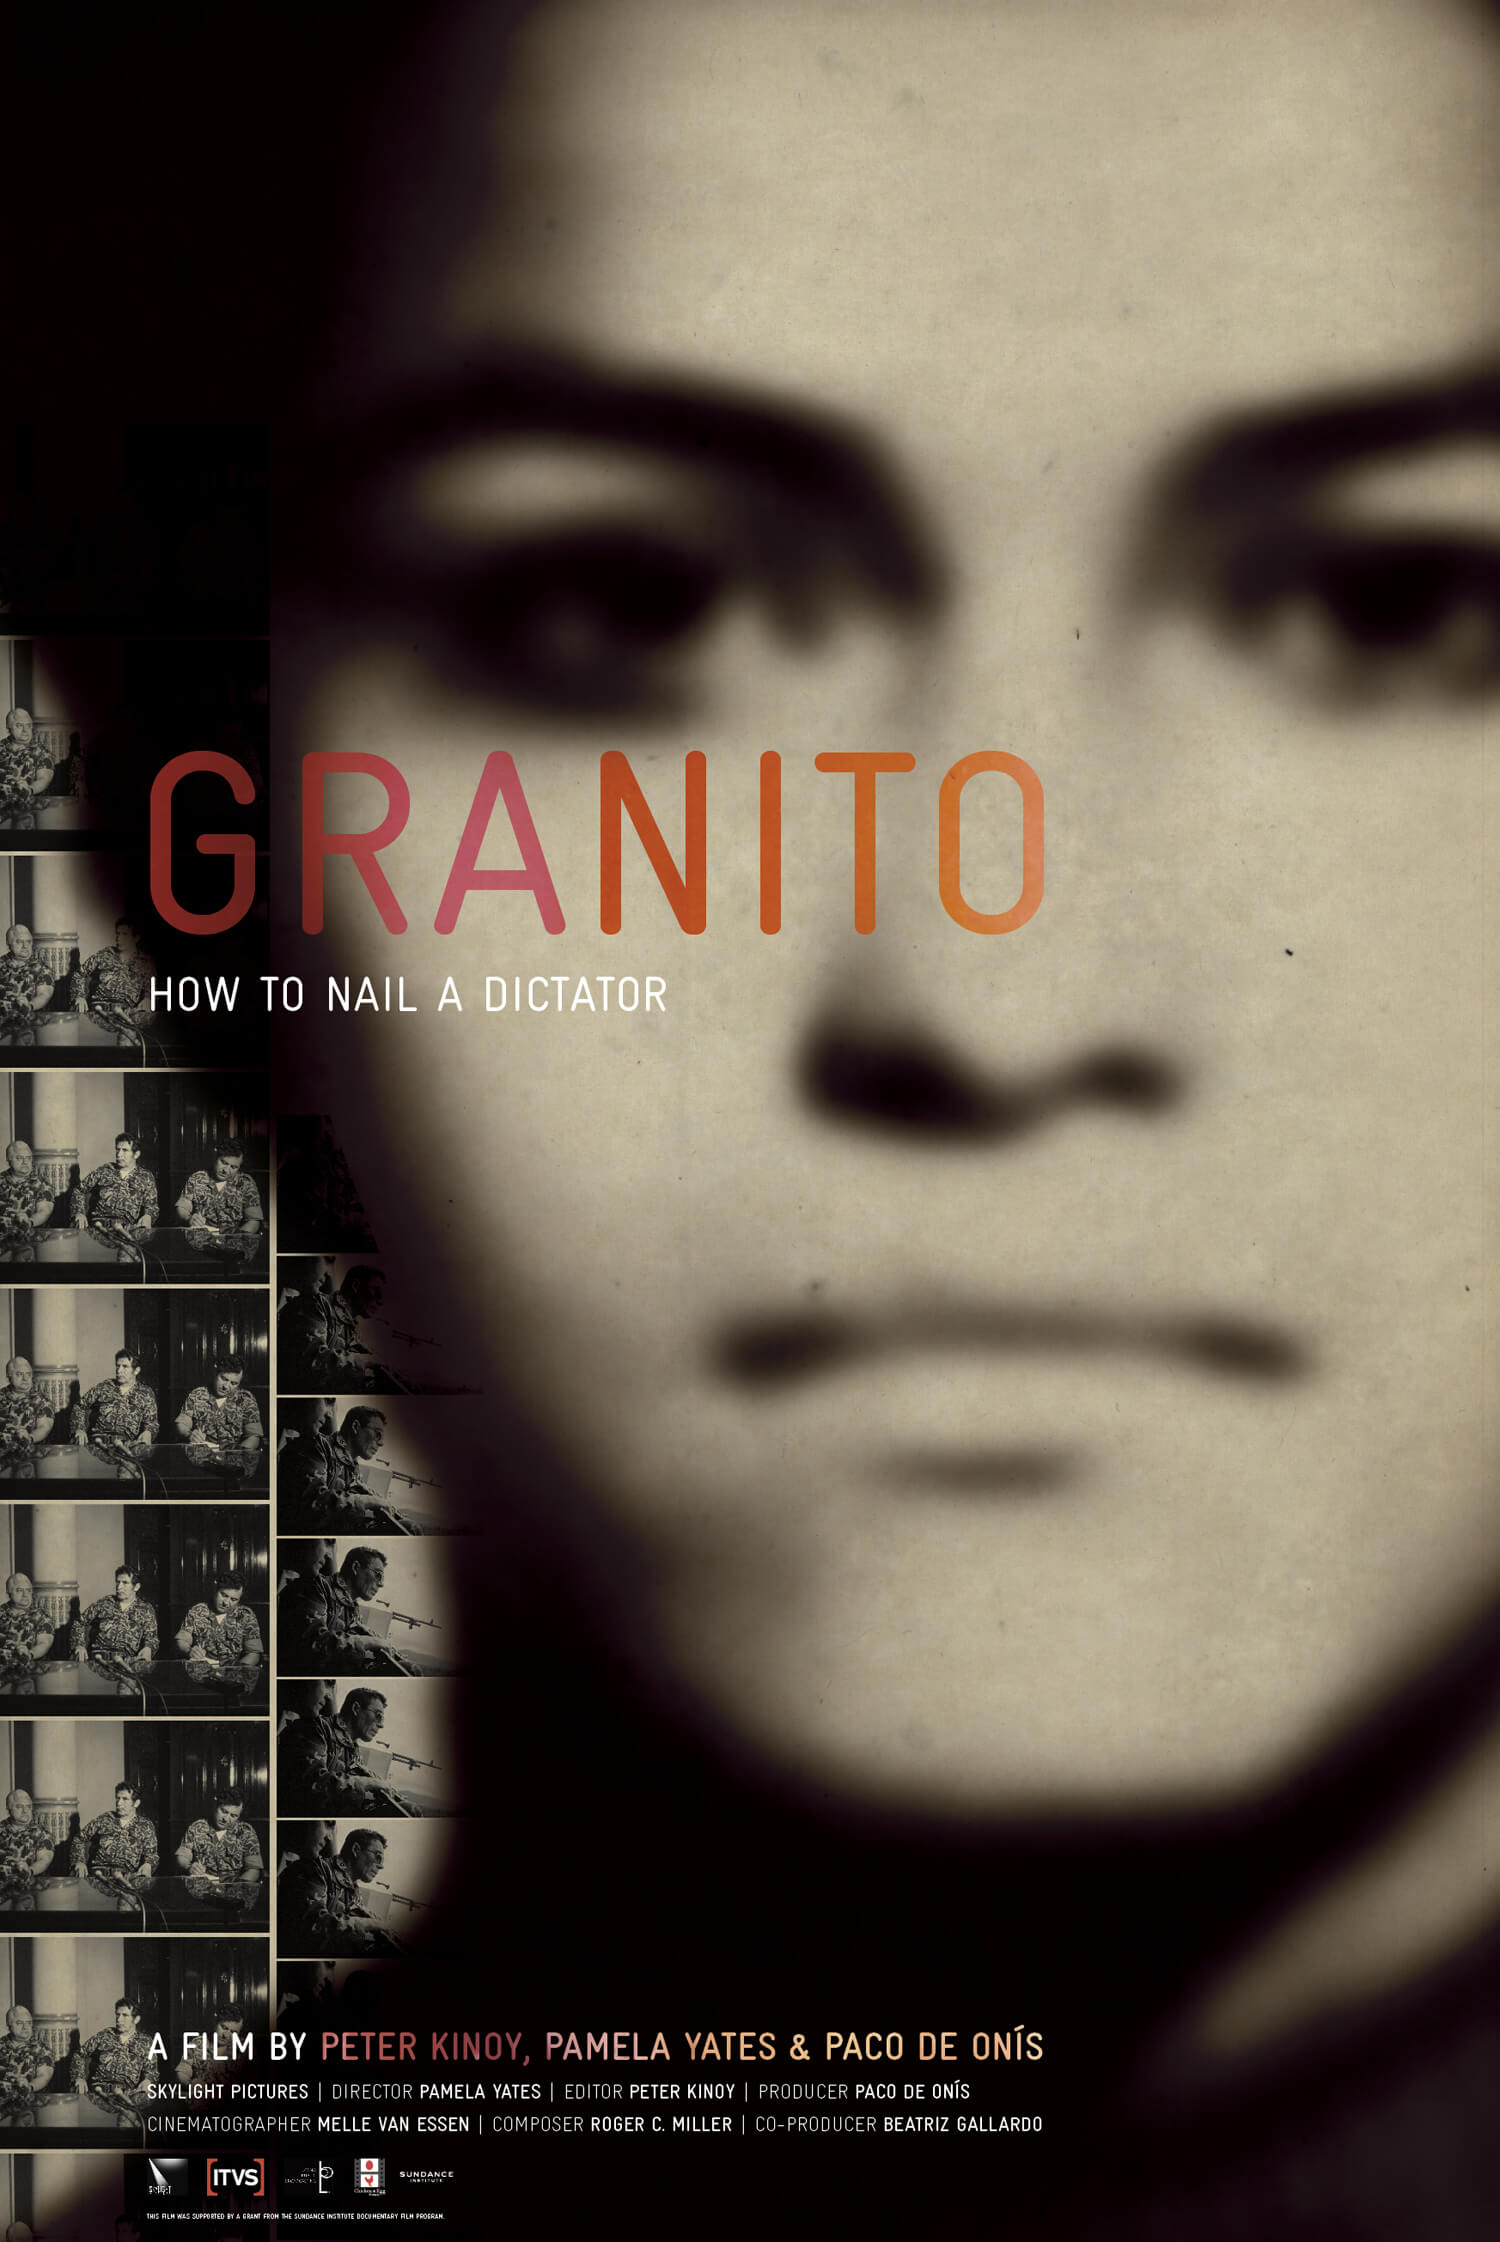 Poster of Granito. Black and white and out of focus close up of a woman's unsmiling face. Behind her, black and white photos of men in military uniforms are arranged in repeating vertical lines to look like a film roll. The graphics on the poster say the full name of the film: "Granito: How to Nail a Dictator." The poster includes text that reads: "A Film by Peter Kinoy, Pamela Yates & Paco de Onís."